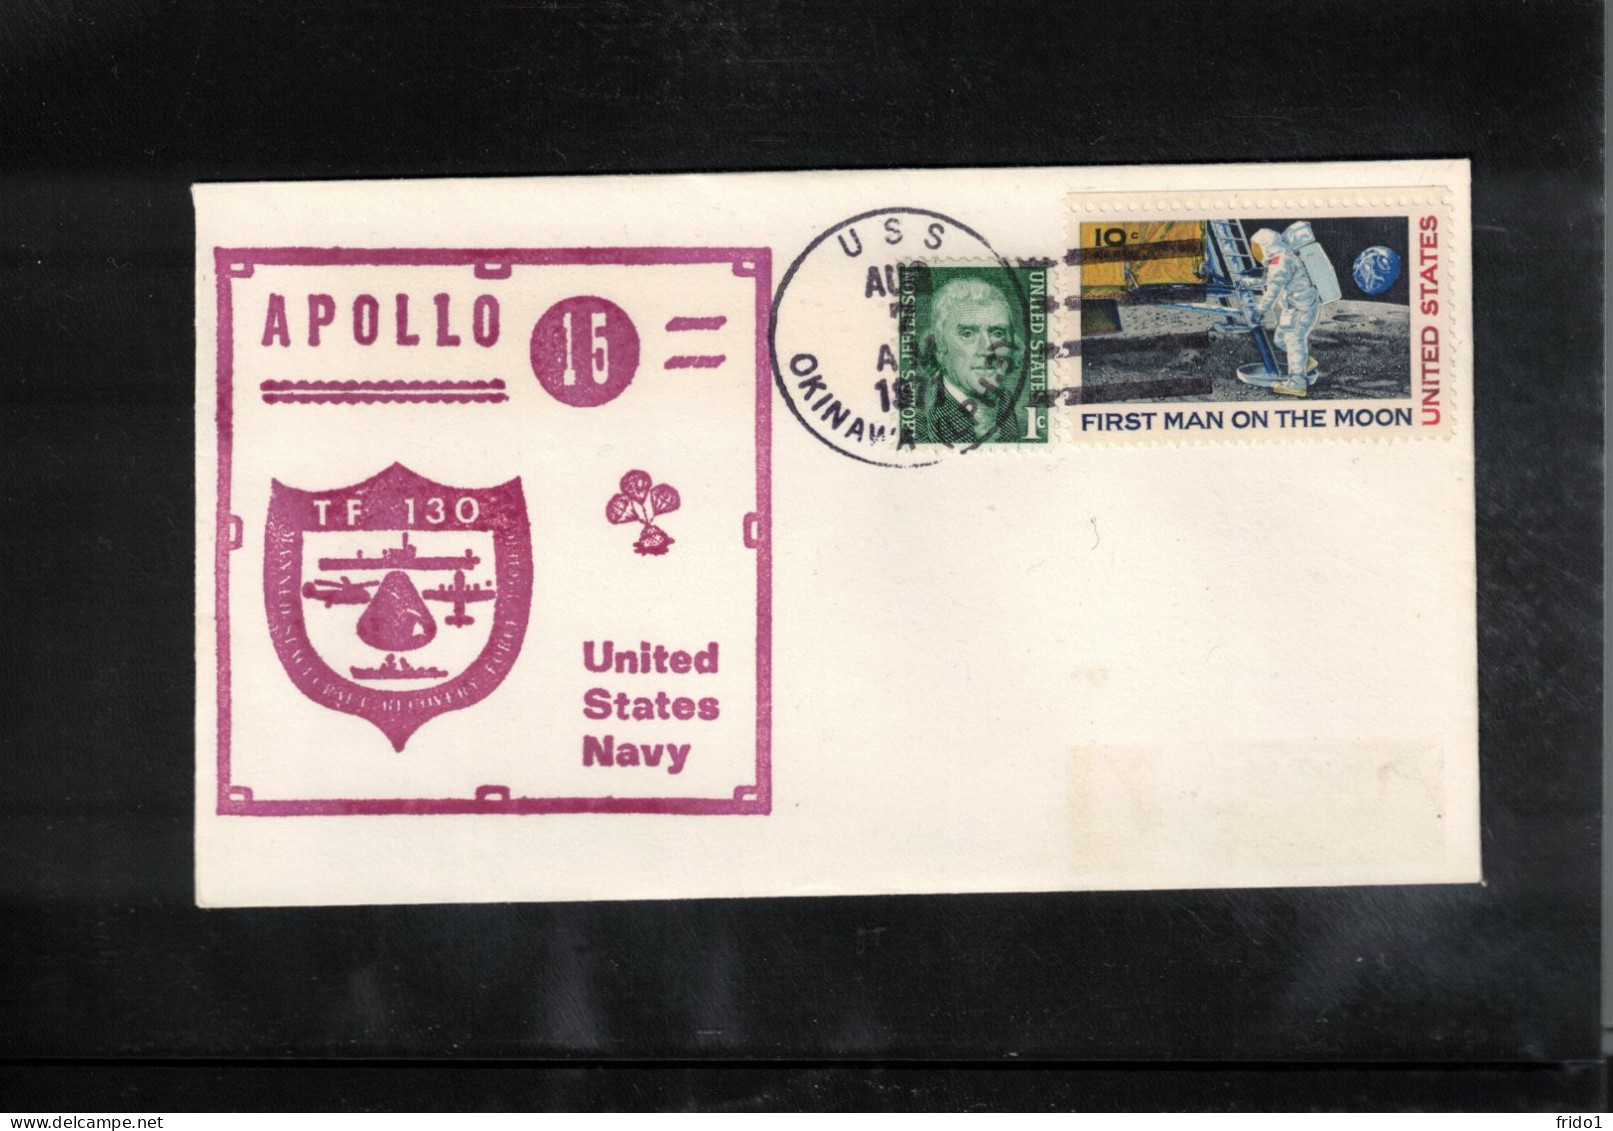 USA 1971 Space / Weltraum - Apollo 15 US Navy Recovery Force TF 130 - USS OKINAWA Interesting Cover - United States